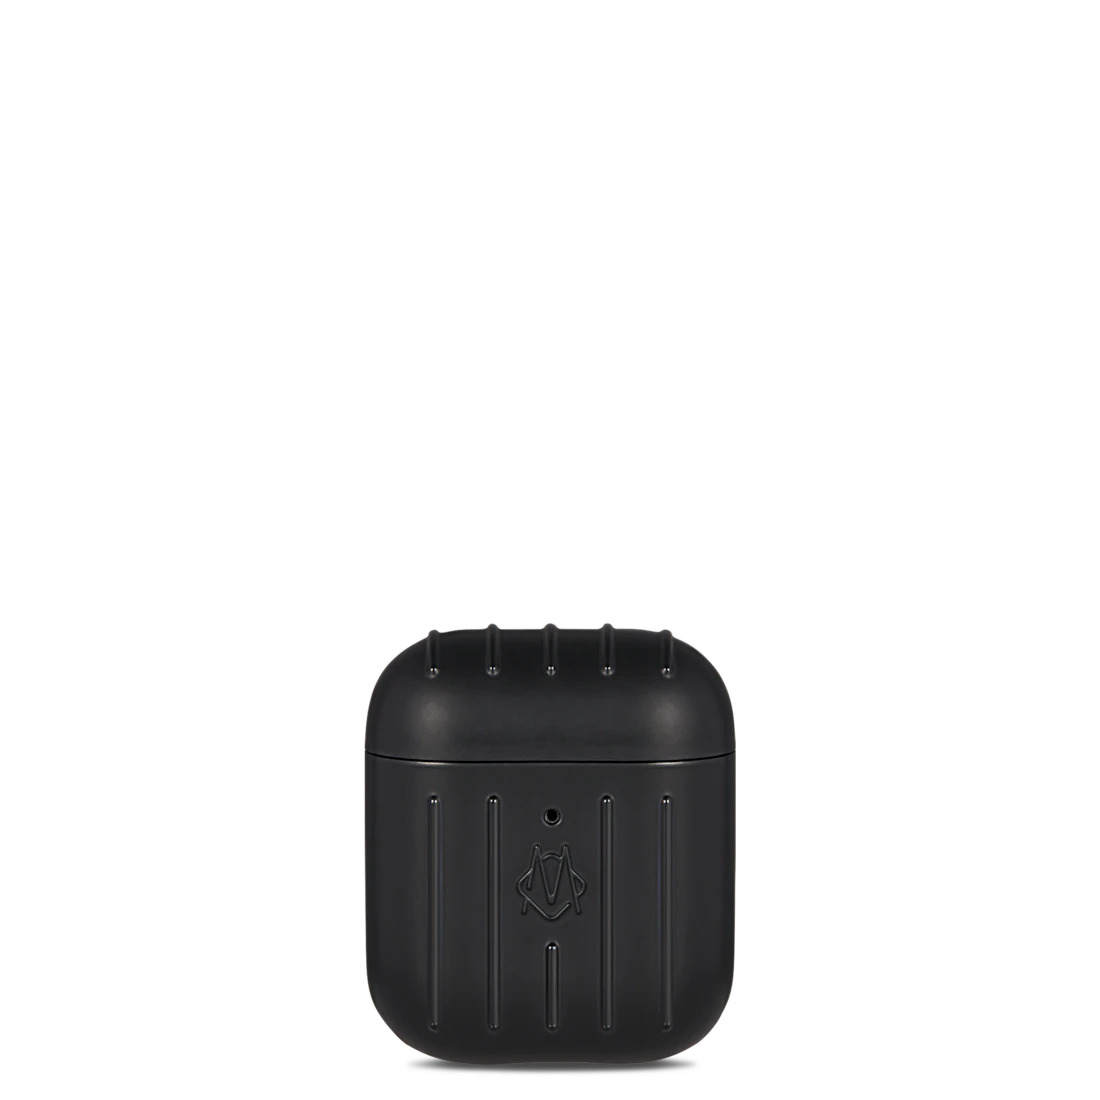 iPhone Accessories Matte Black Case for AirPods 1 & 2 - 1